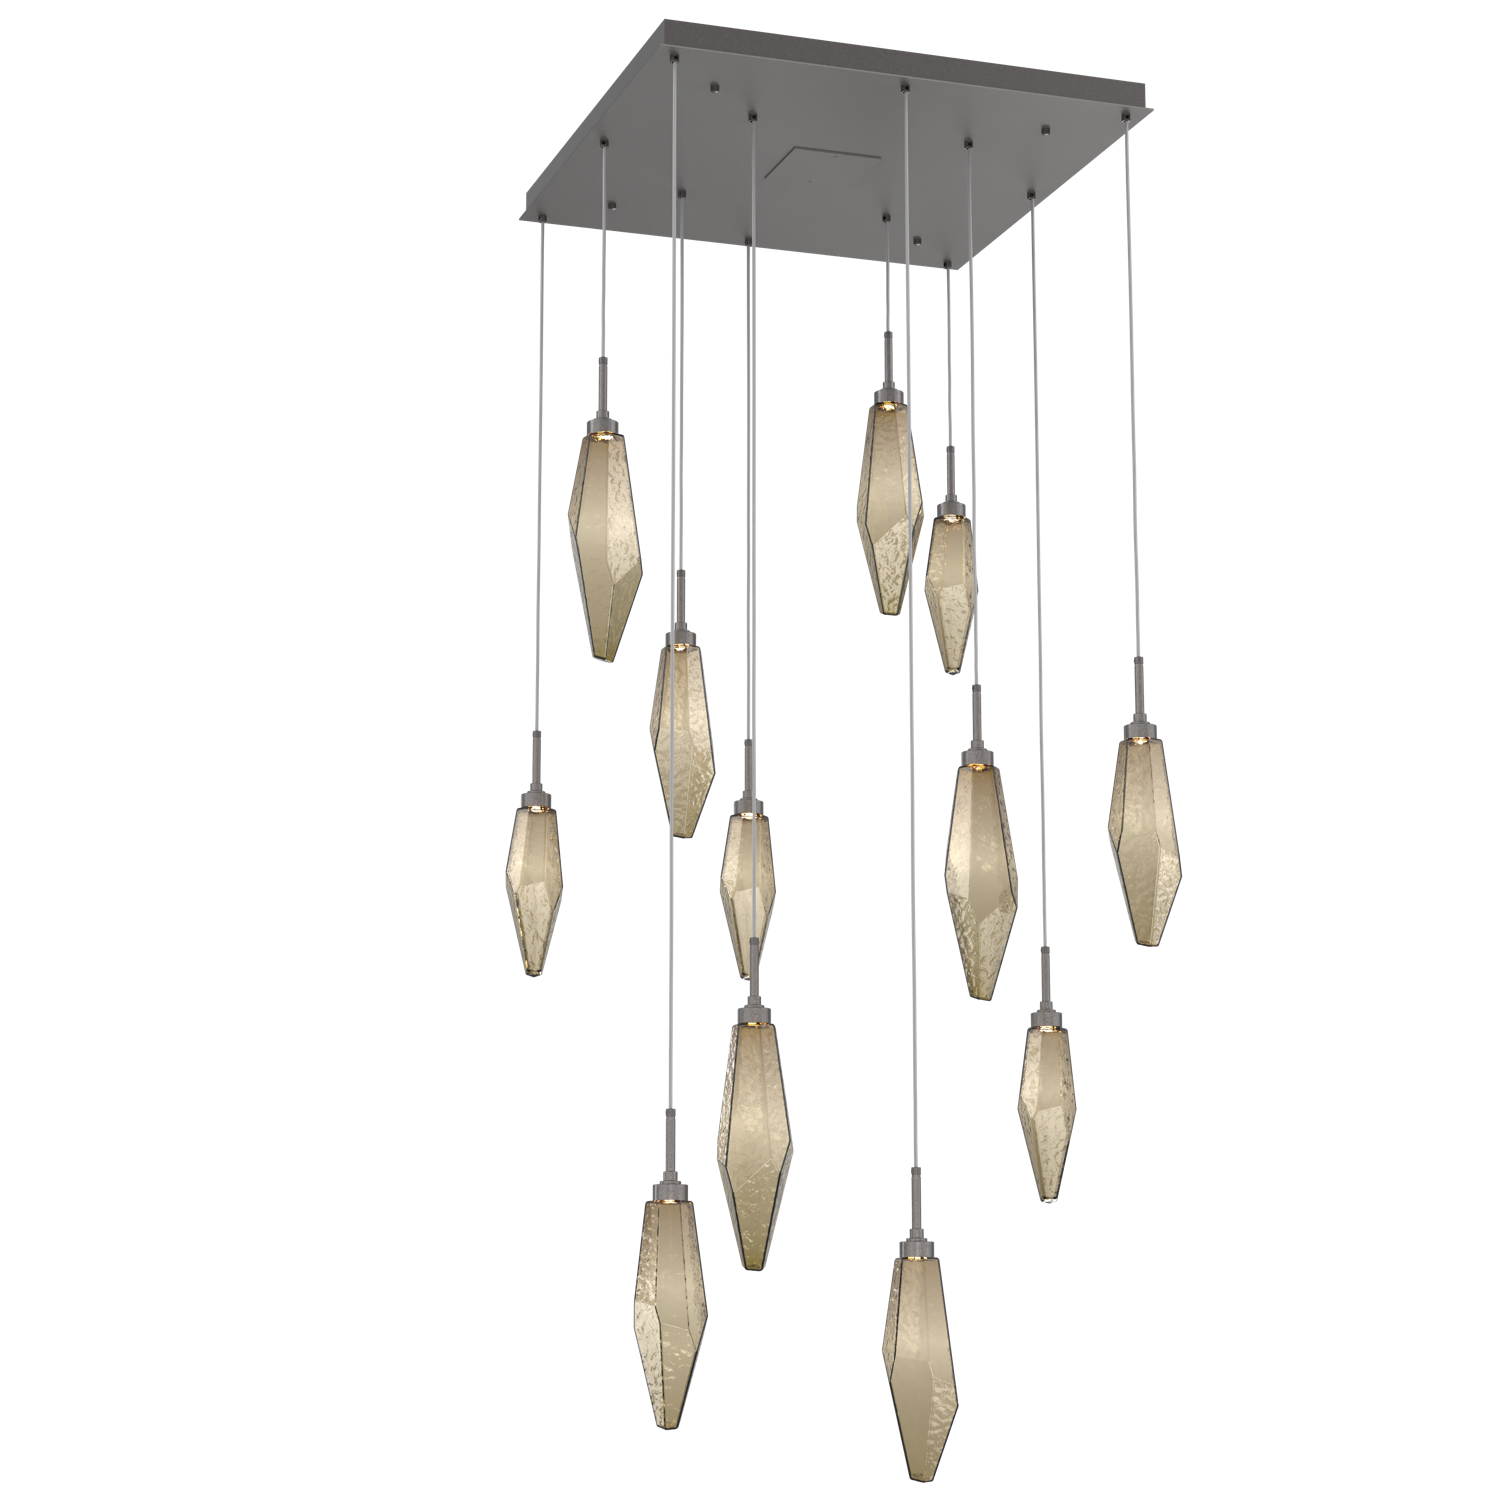 CHB0050-12-GP-CB-Hammerton-Studio-Rock-Crystal-12-light-square-pendant-chandelier-with-graphite-finish-and-chilled-bronze-blown-glass-shades-and-LED-lamping